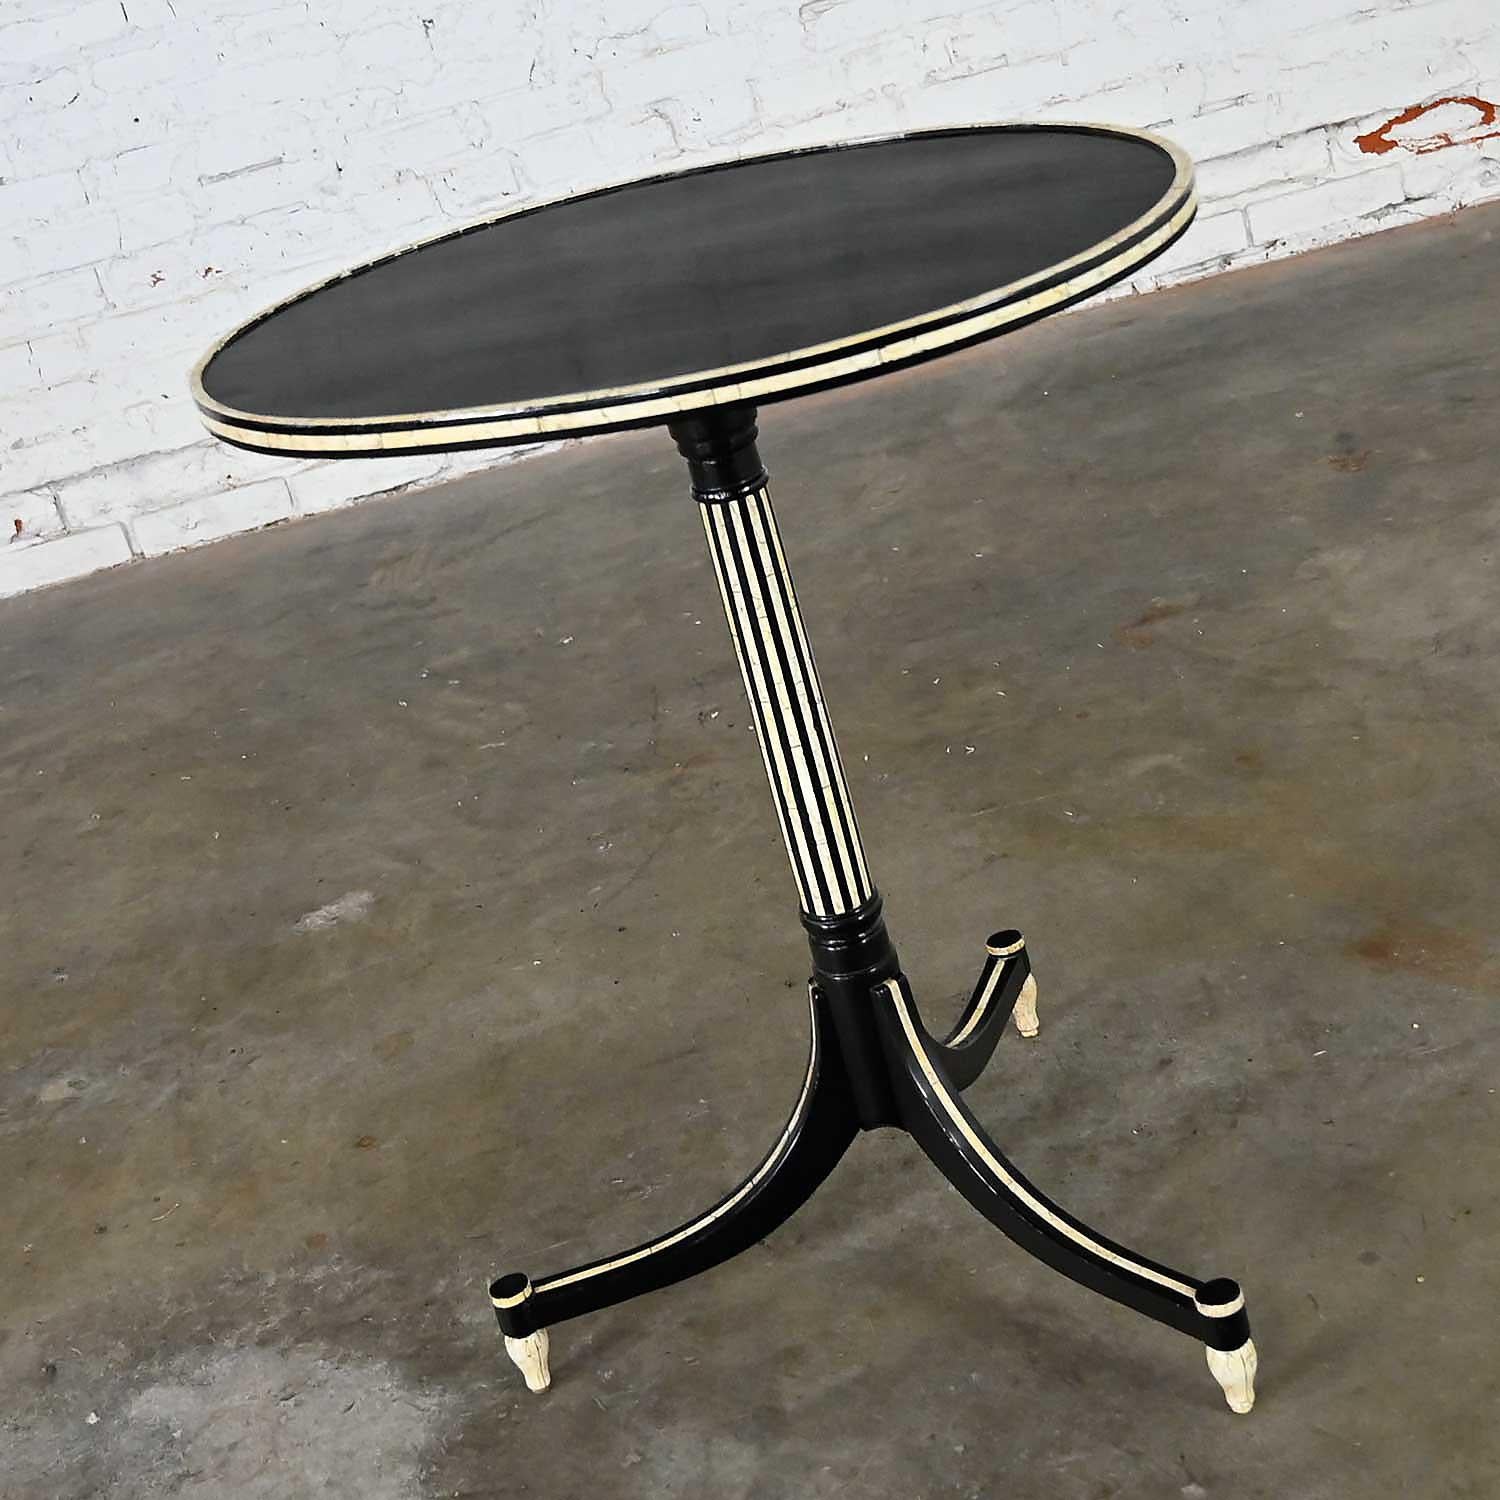 Neoclassical Neo-Classic Olive Oval Side Table Rose Tarlow Melrose House Ebony Black & White